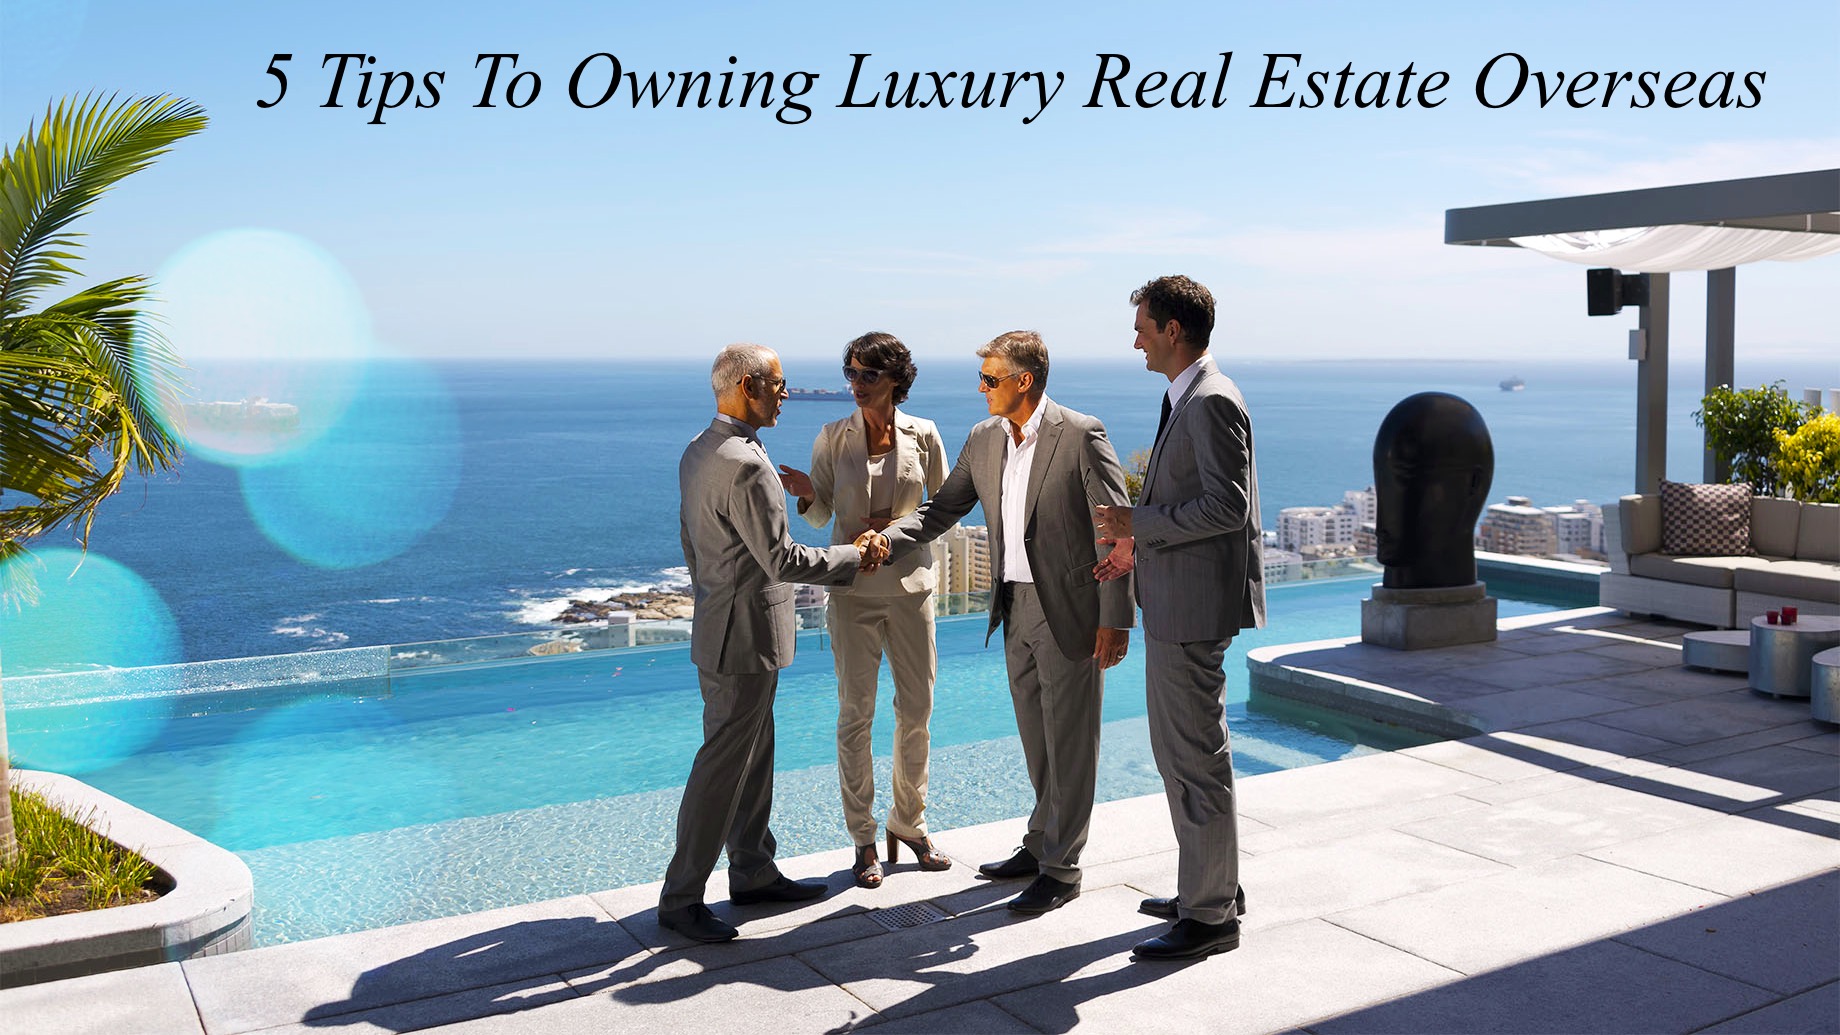 5 Tips To Owning Luxury Real Estate Overseas